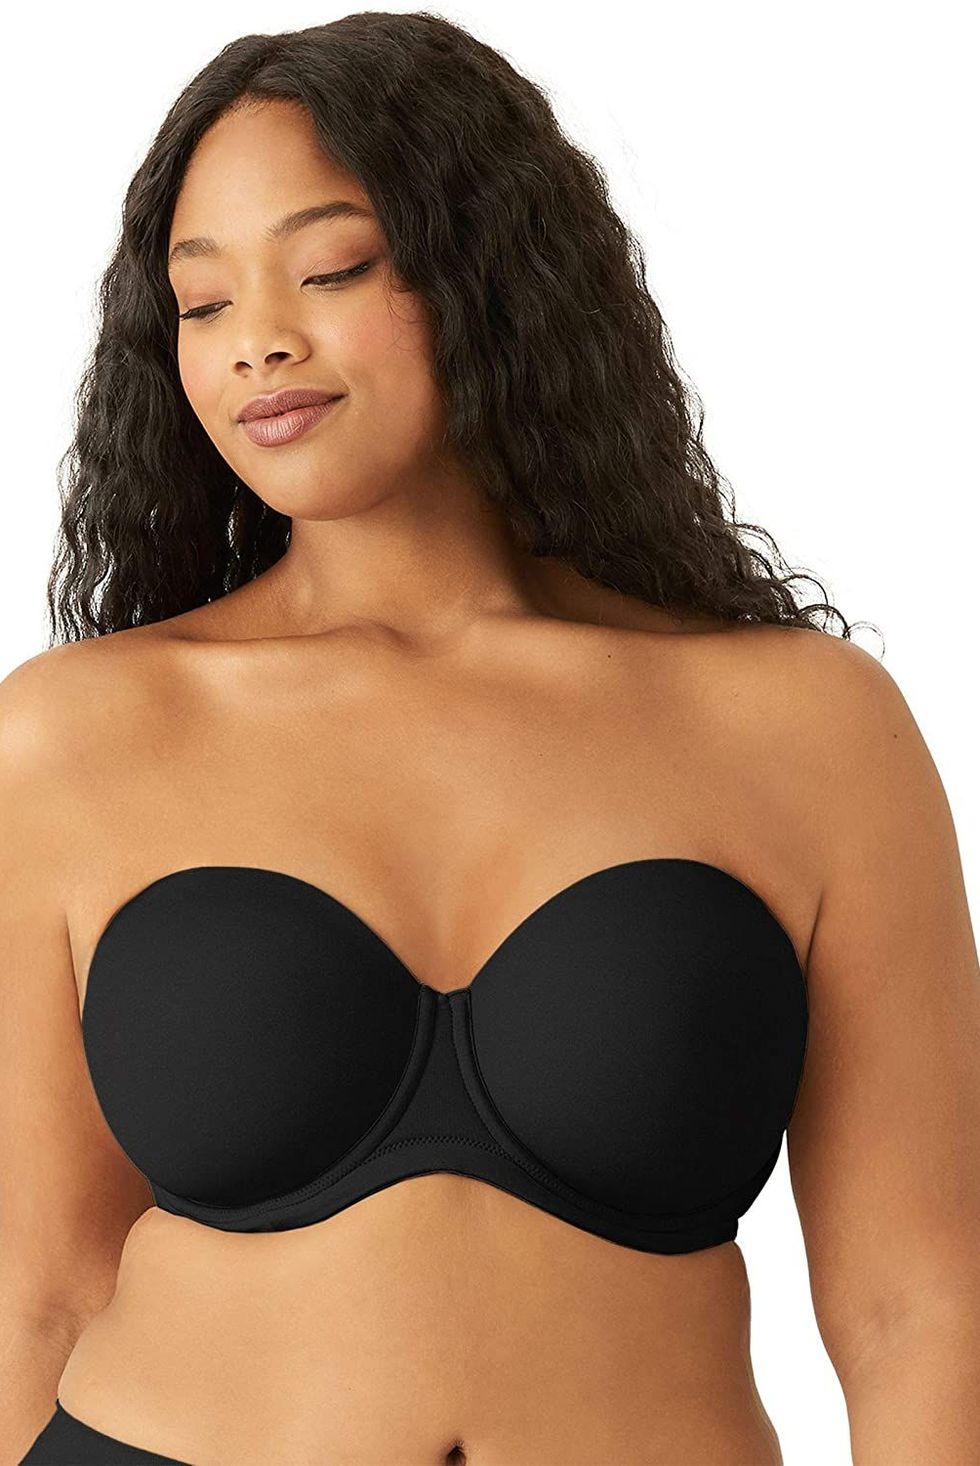 10 Best Plus Size Strapless Bras That Fit and Flatter - Elisabeth